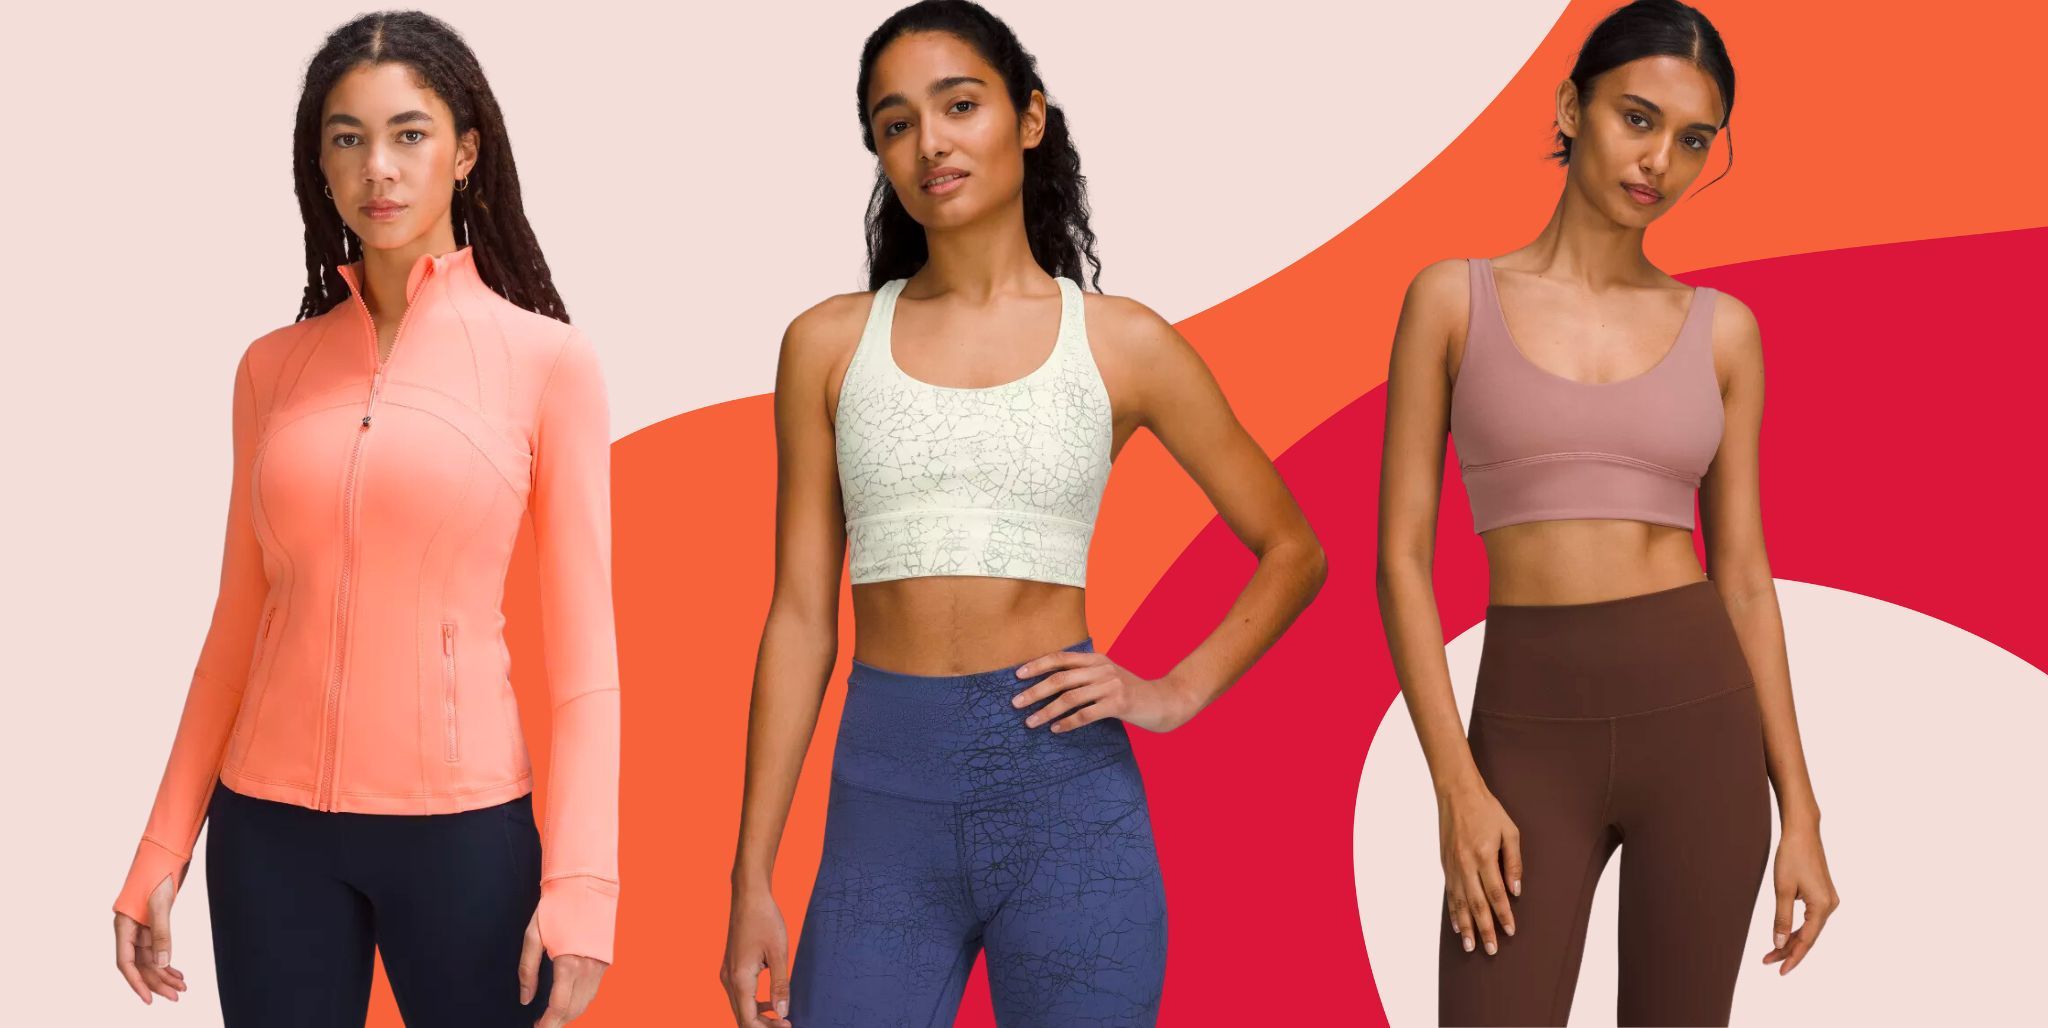 Save up to 50% on lululemon must-haves in the winter sale